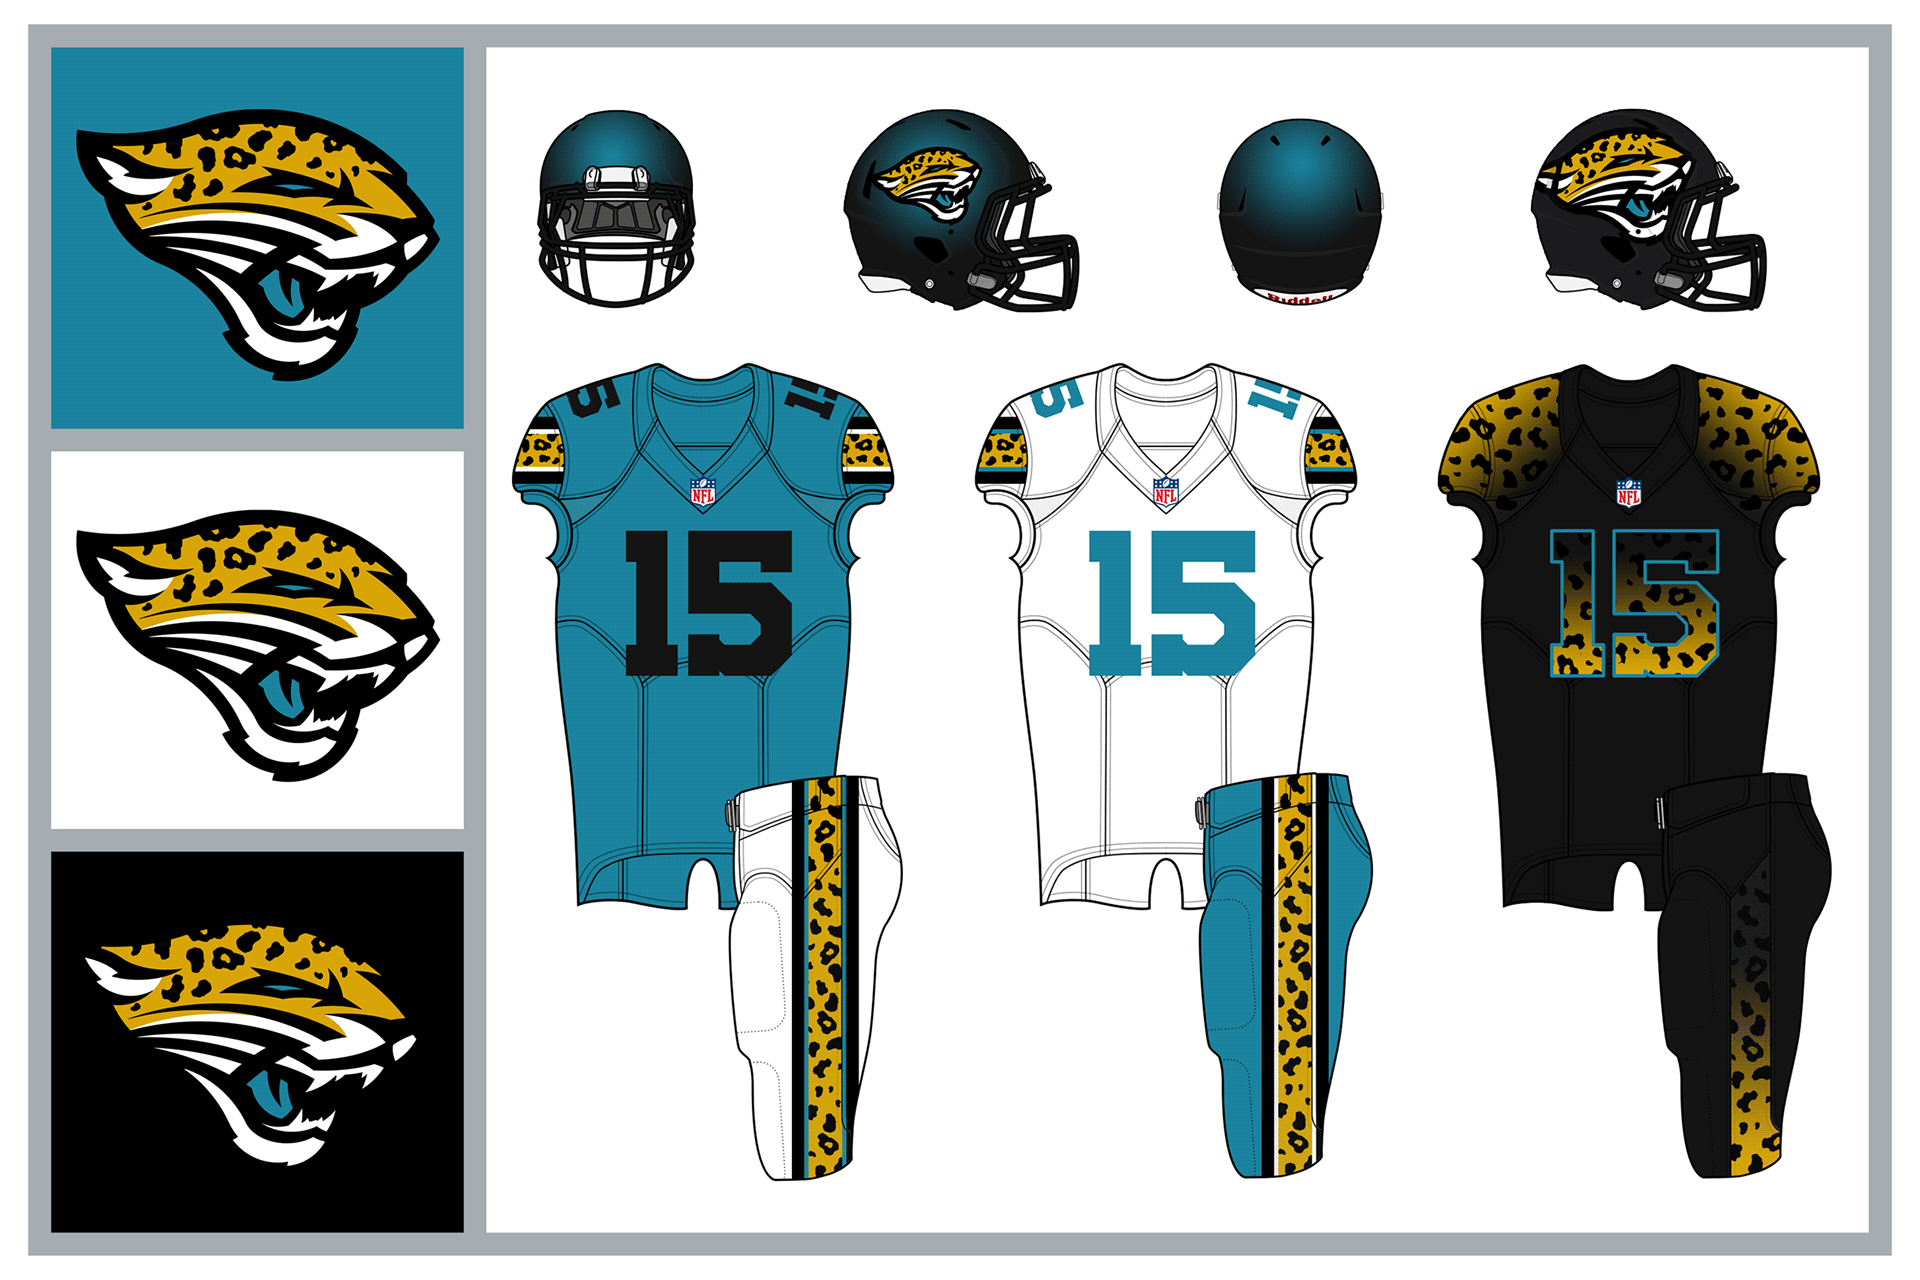 JACKSONVILLE JAGUARS: The Jags logo is a mix of old and new. The